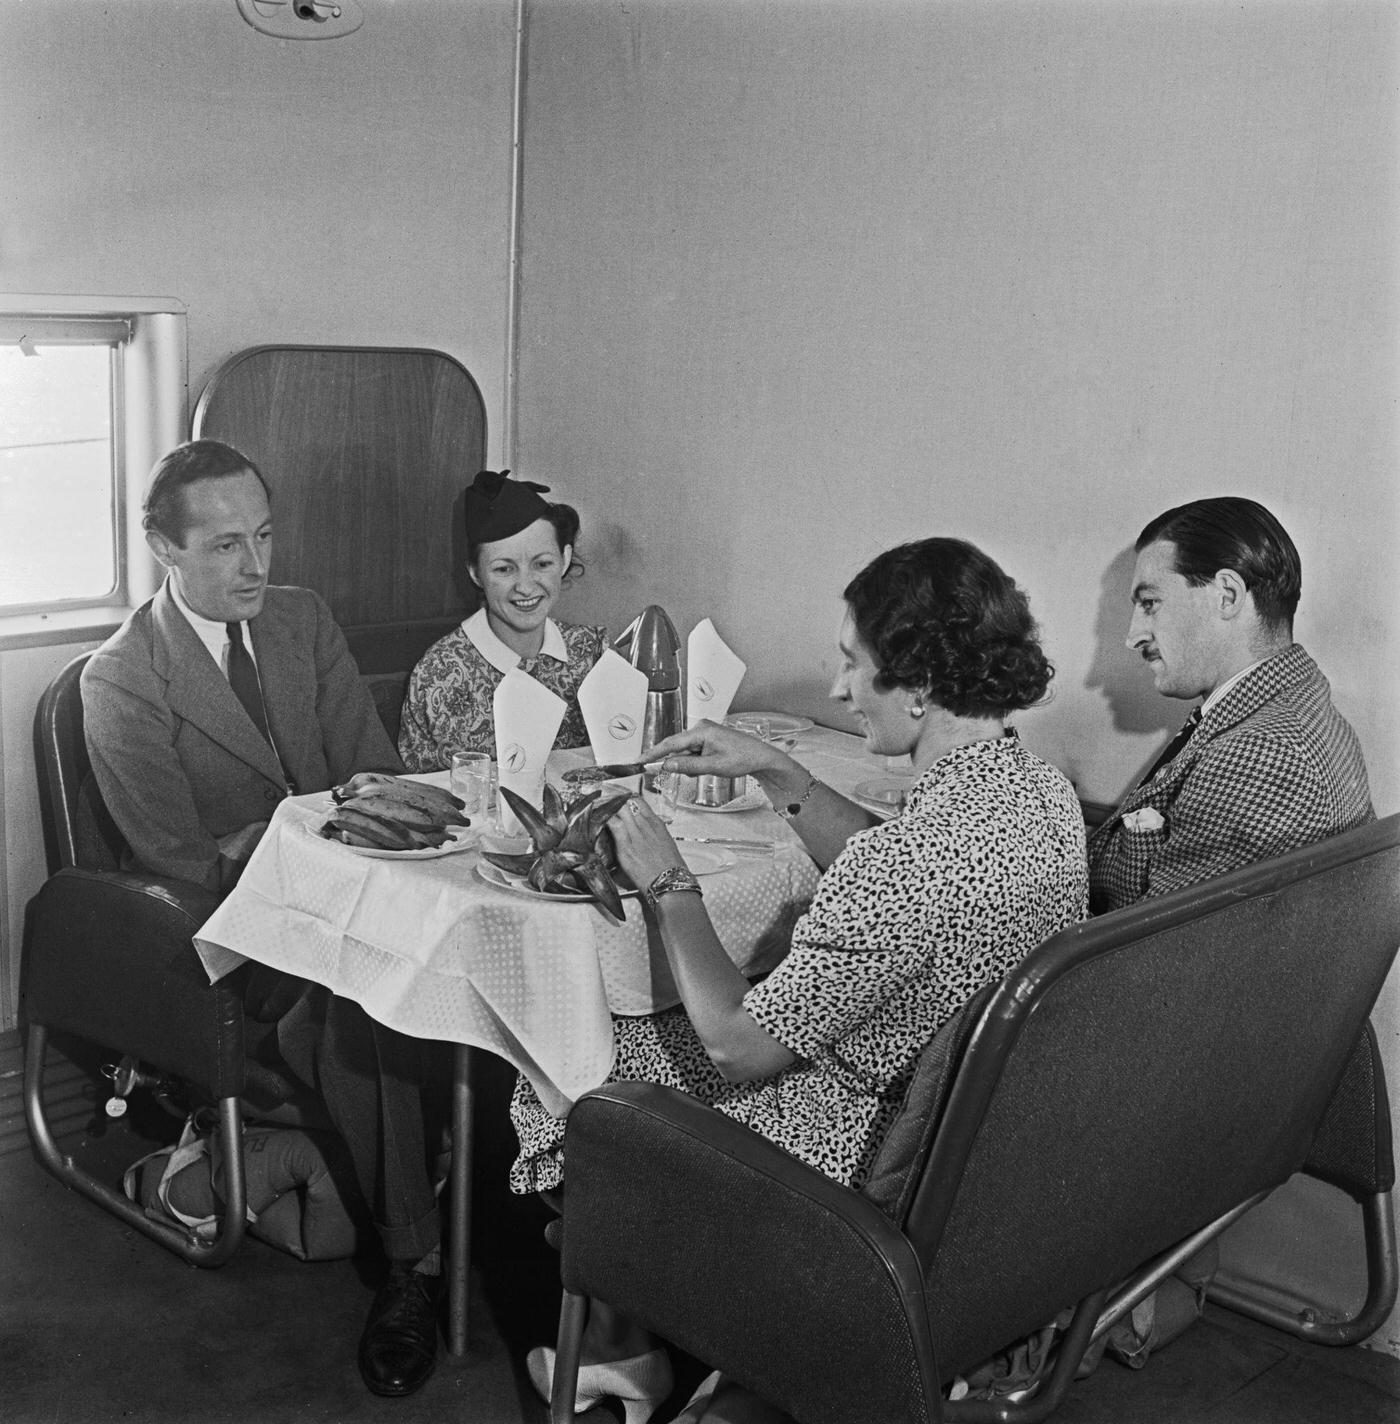 Four passengers are seen enjoying a meal at a table aboard the British Overseas Airways Corporation (BOAC) Boeing 314A Clipper flying boat Berwick on an international flight from England during World War II on 31st August 1942.